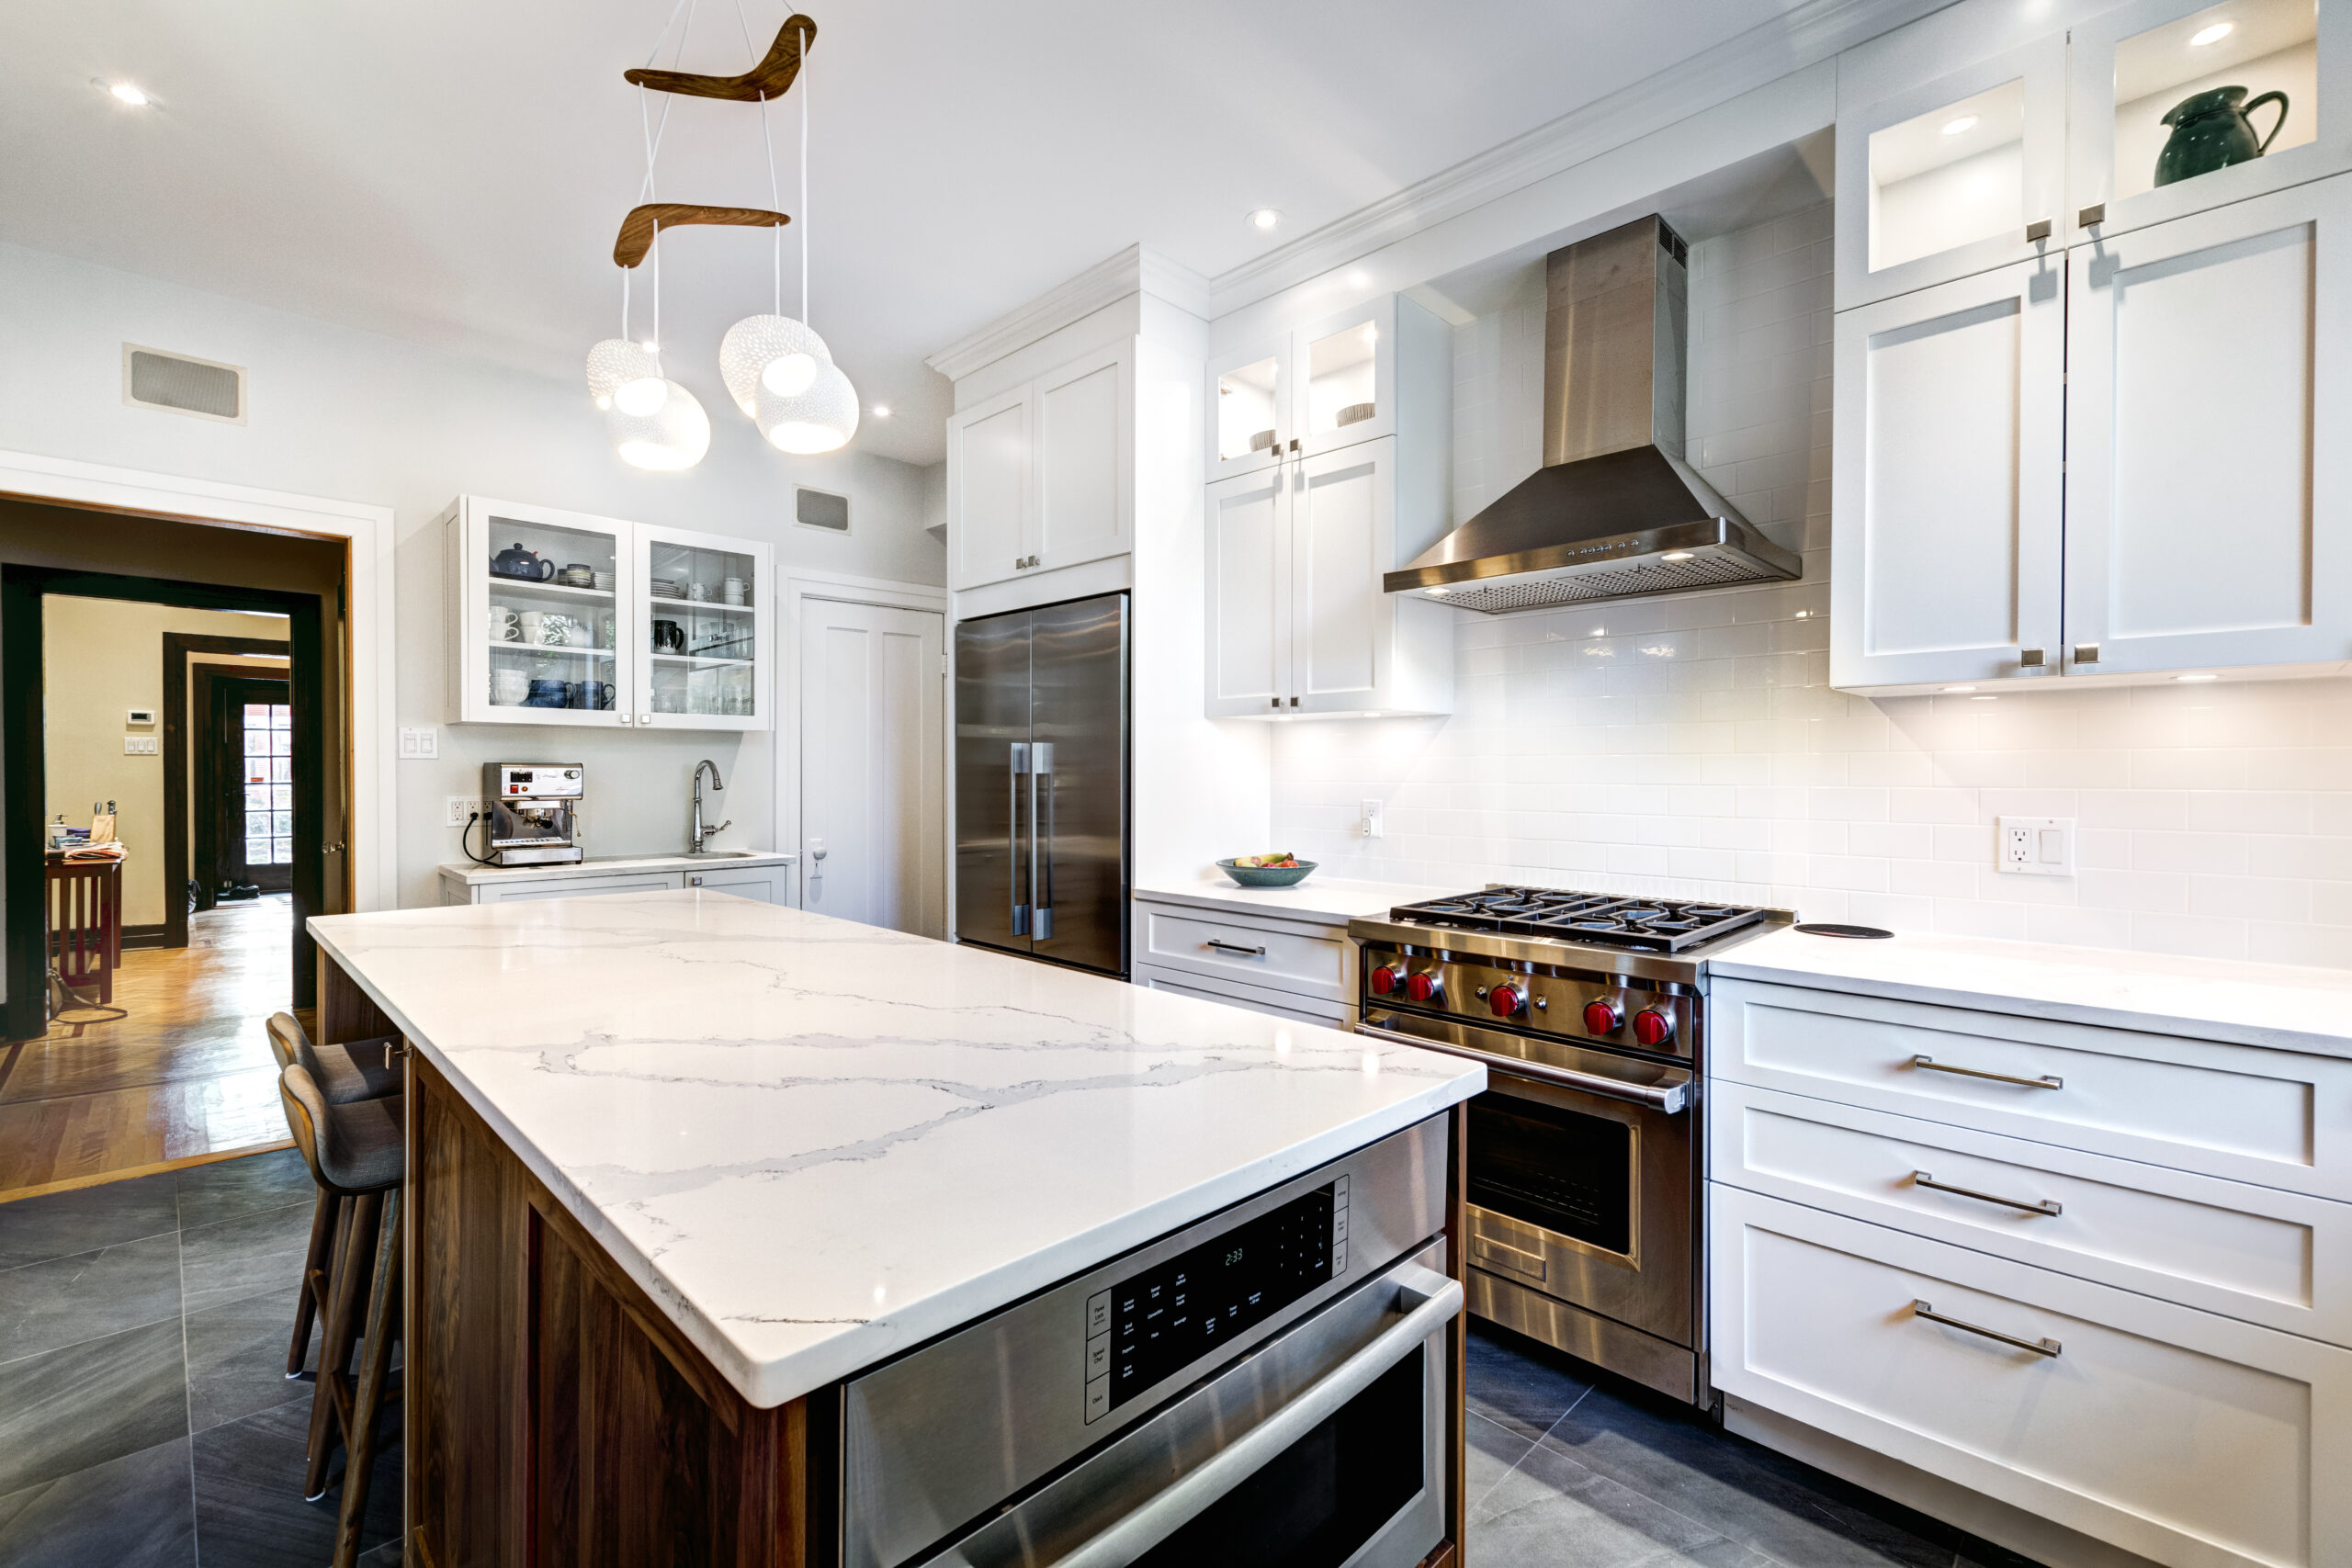 Elegant Kitchen Design with Shaker Kitchen Cabinet and White Countertop